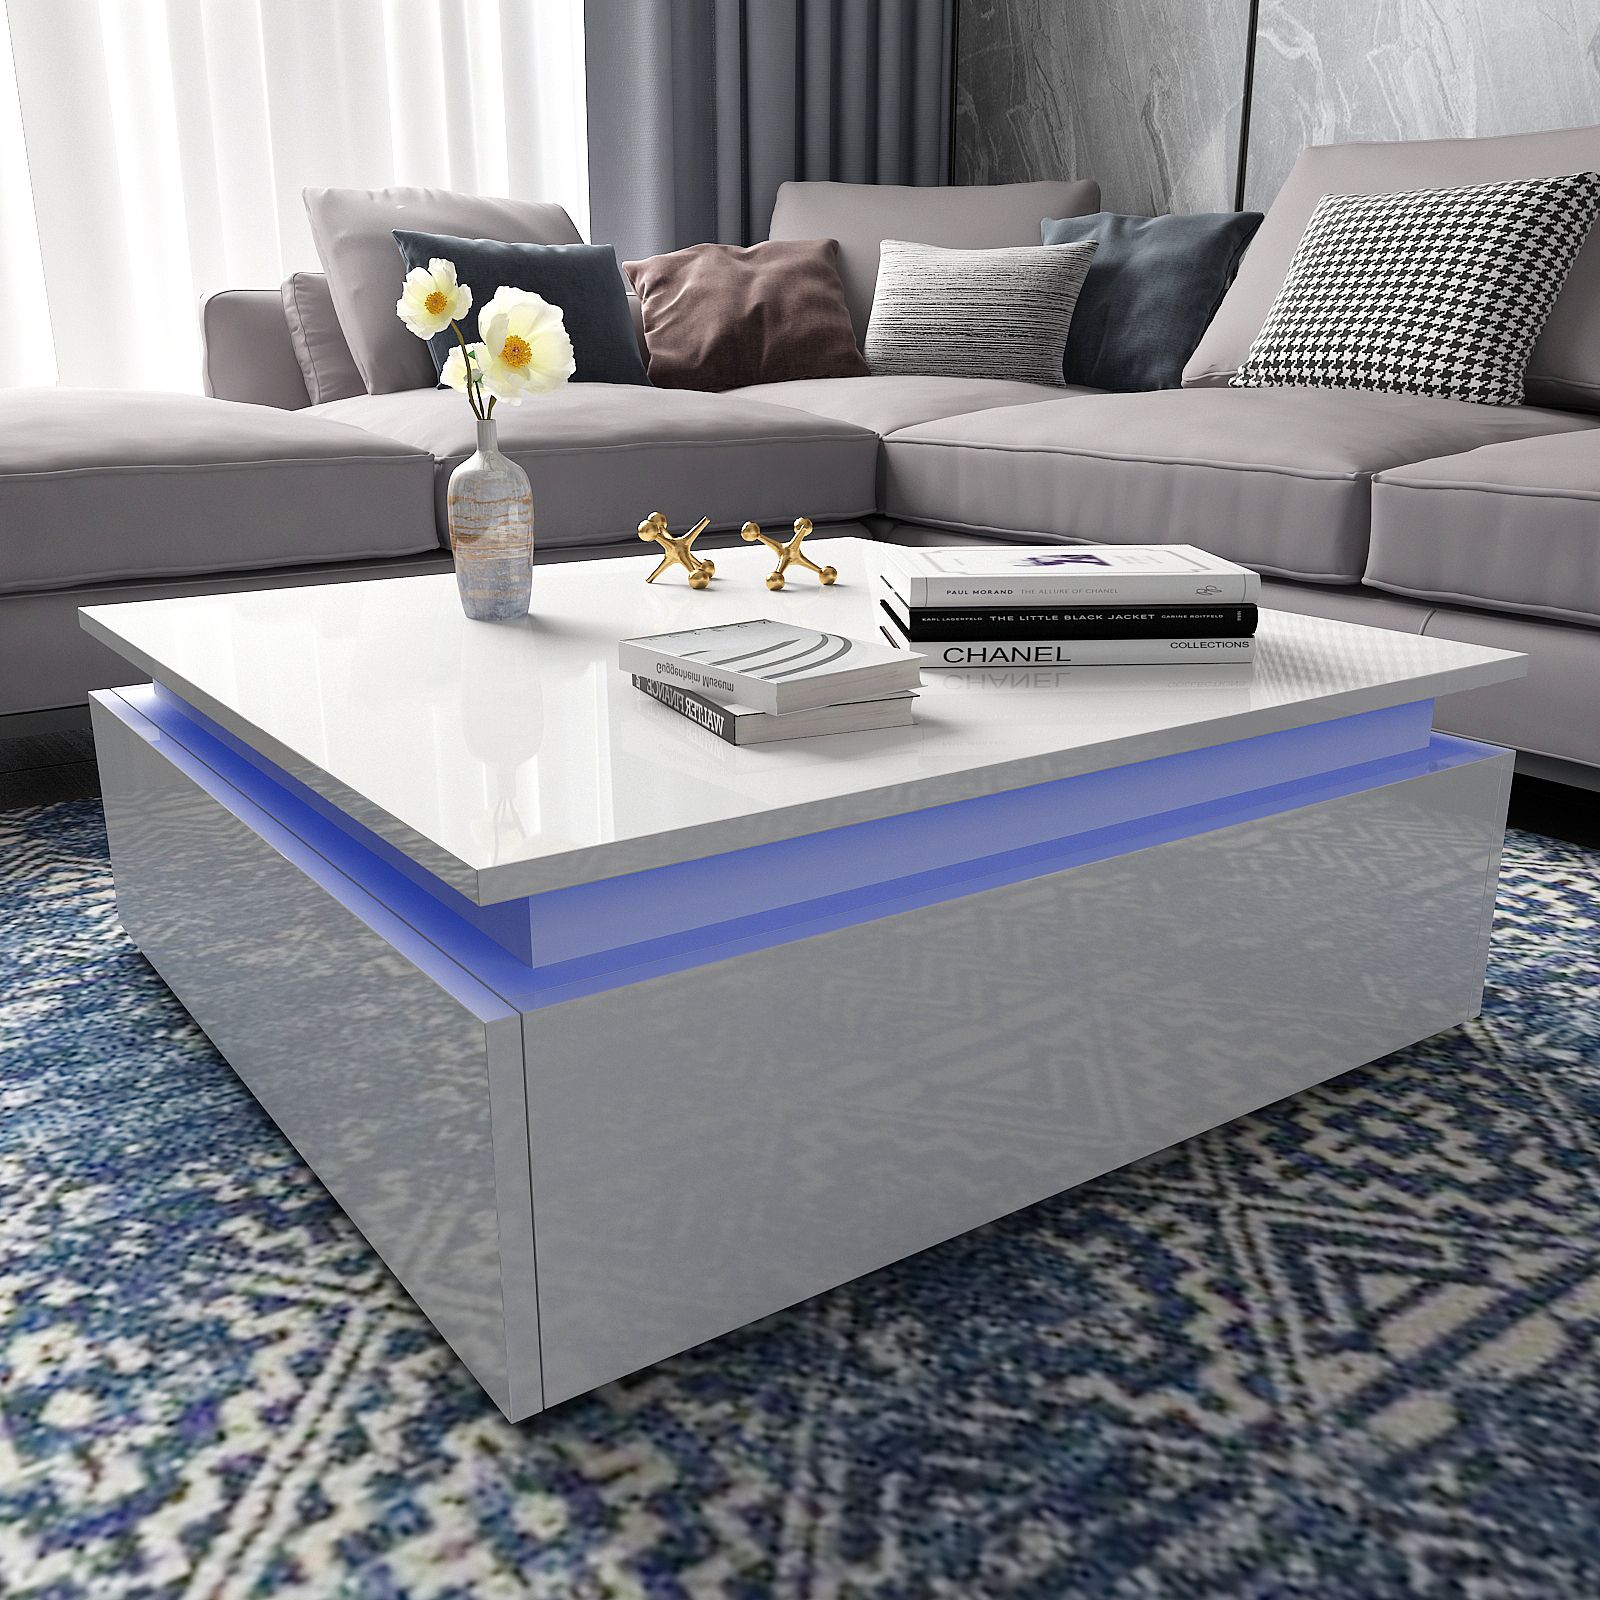 Rgb Led Light Coffee Tea Table Drawer Storage High Gloss Furniture Inside Led Coffee Tables With 4 Drawers (Gallery 20 of 20)